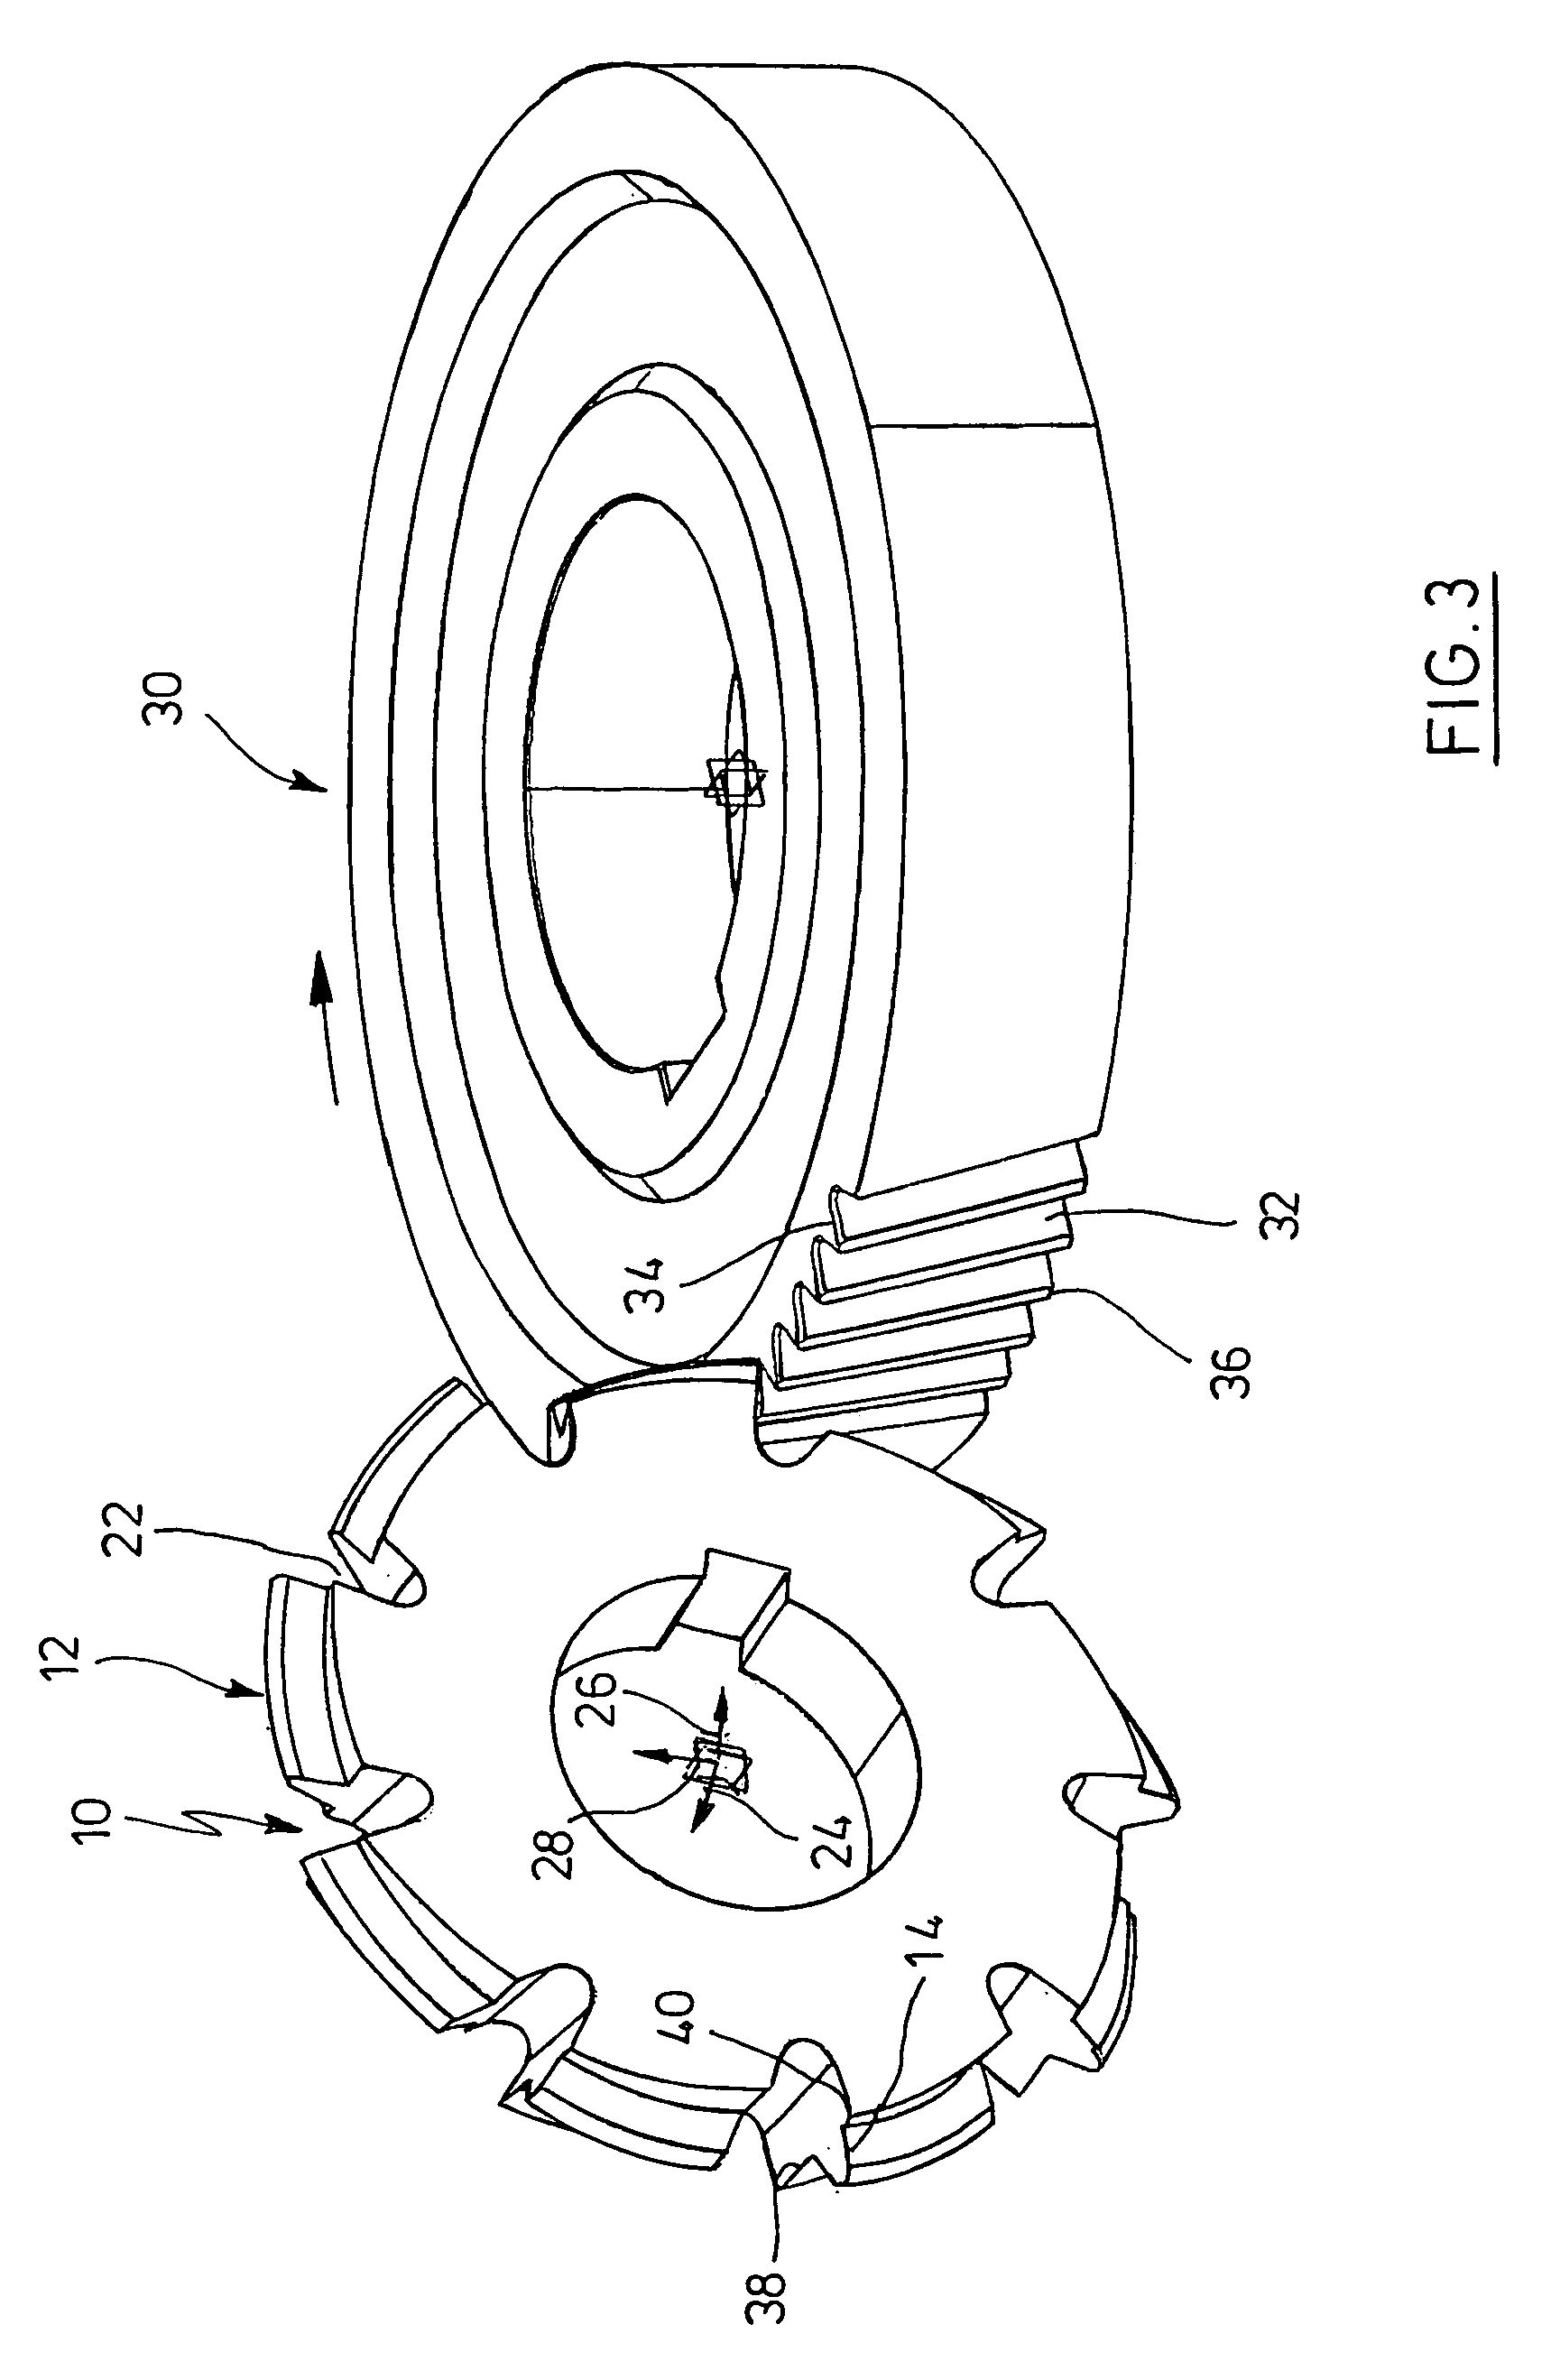 Method, device, and tool for chamfering the front-end edges of the inter-teeth grooves of a gear